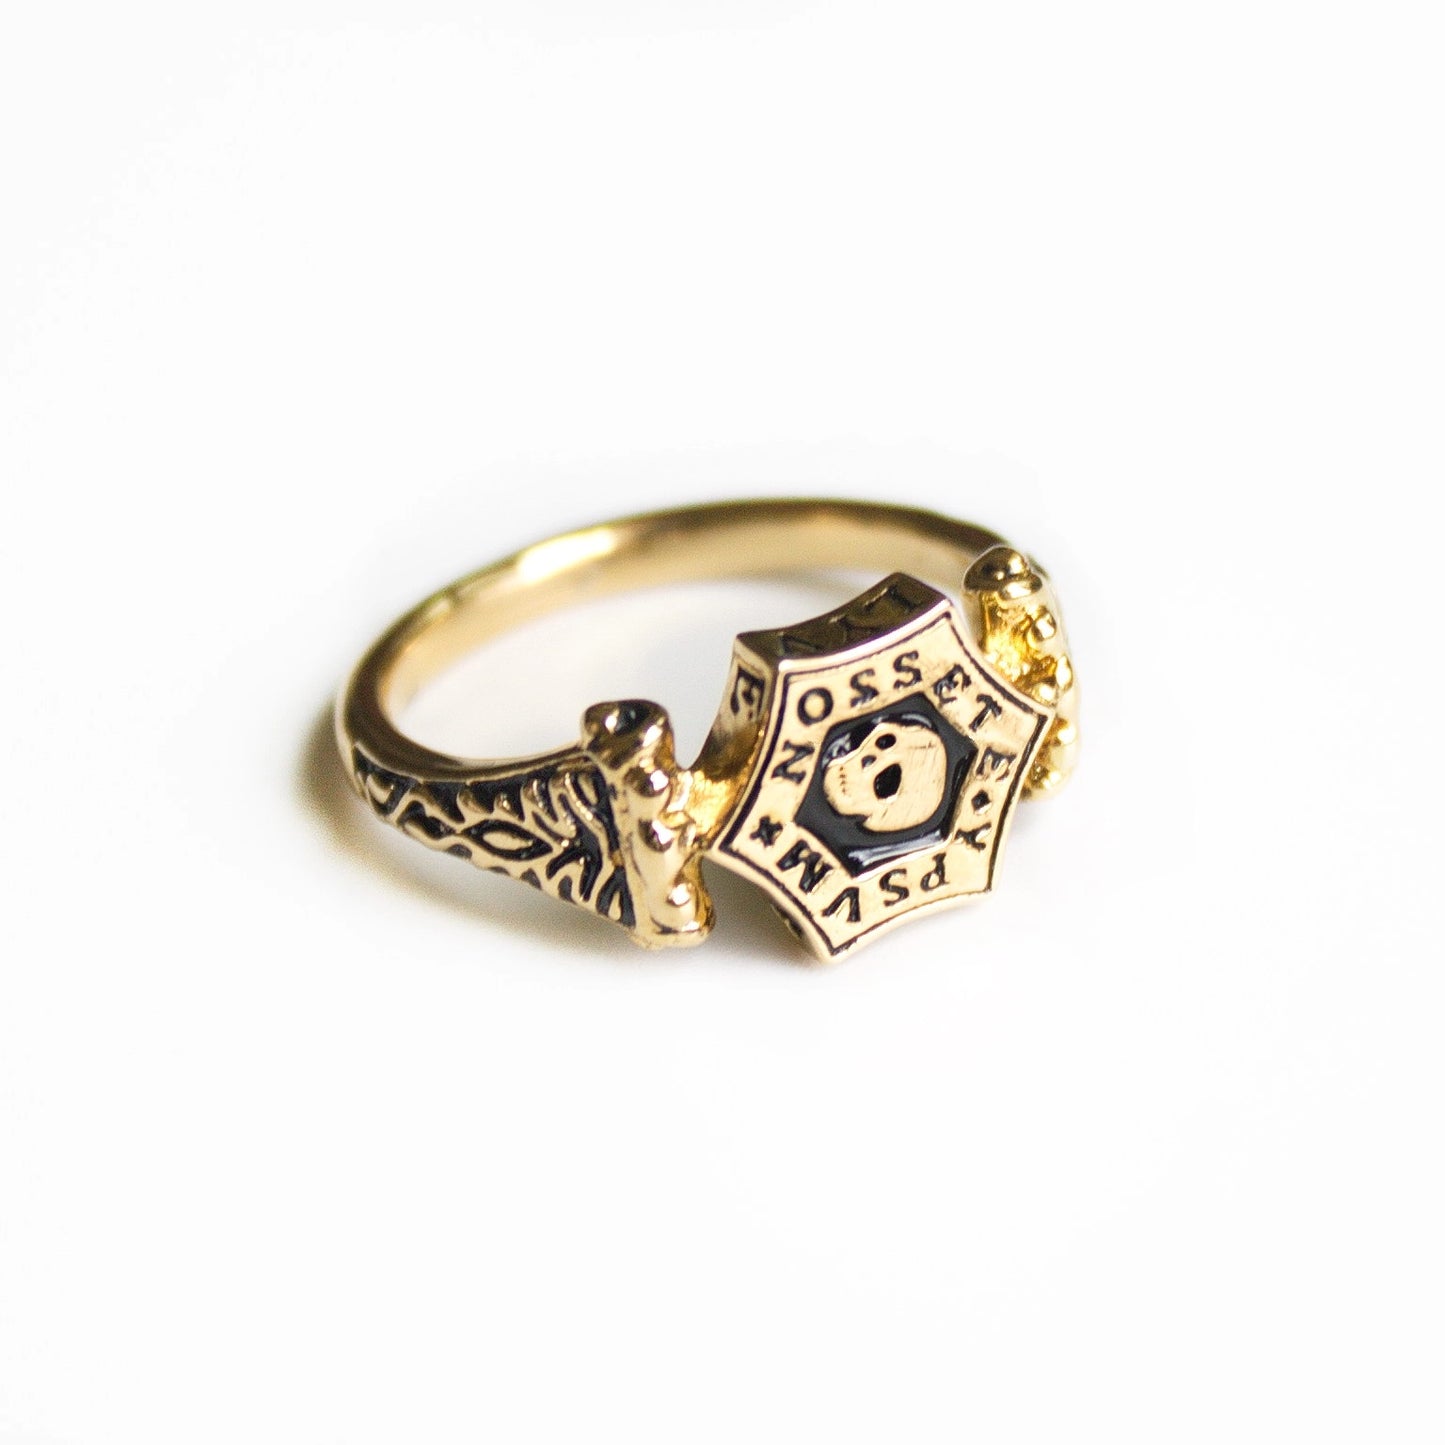 Mourning Ring with Skull from England, 1550-1600 A.D.